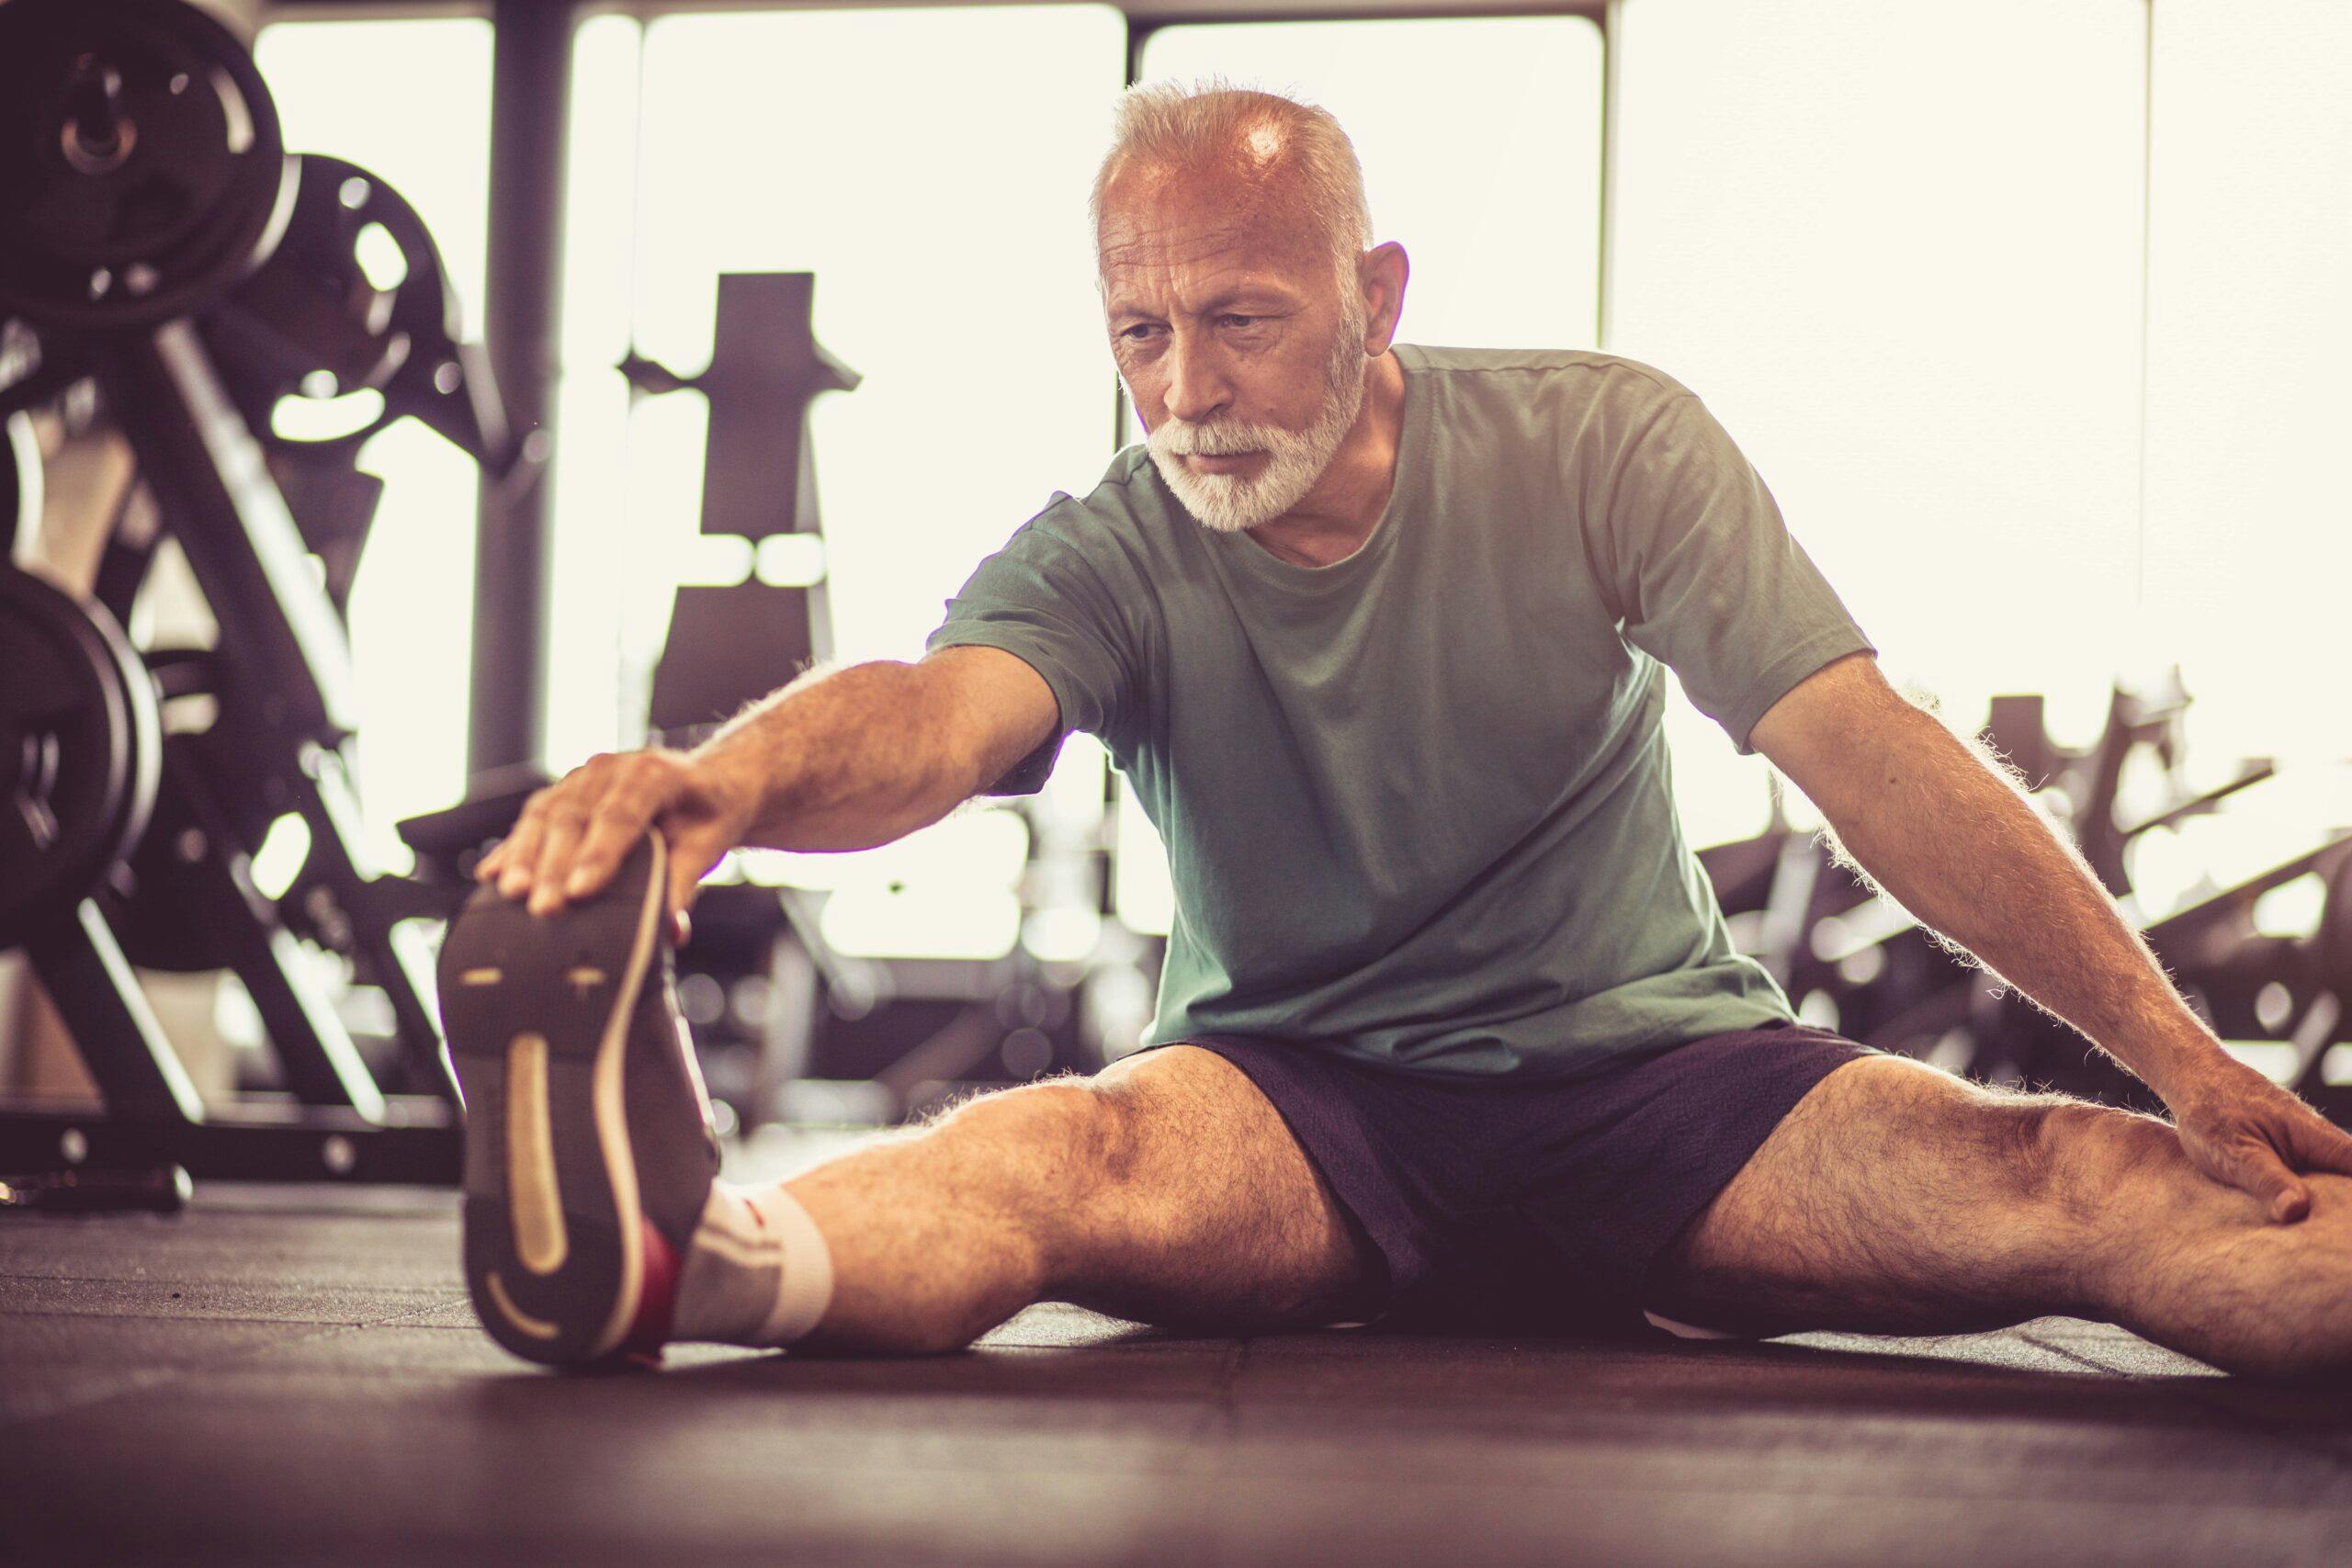 Top 6 Plyometric Exercises For Active Older Adults - Action Potential